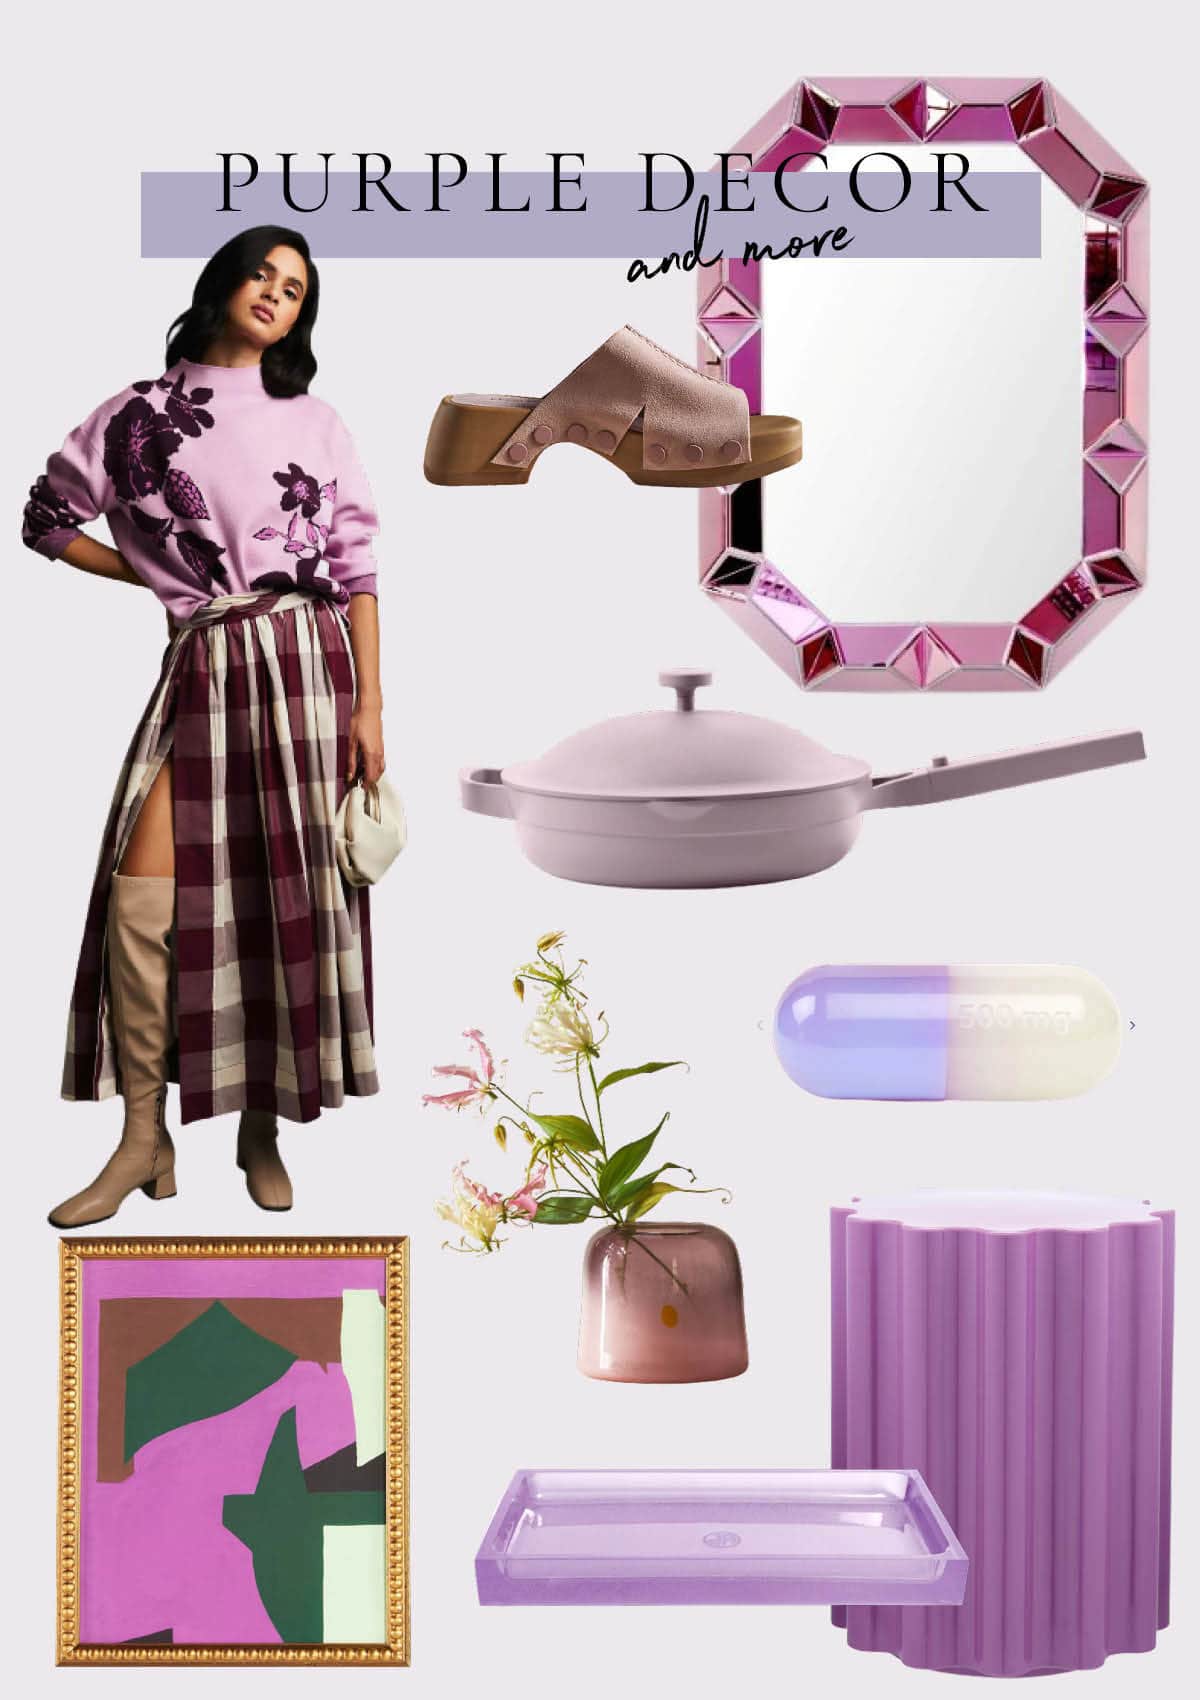 Purple and lilac decor is trending in 2023 - Purple decor is making its way back into interior design. Here are a few trending lilac and lavender decor picks.